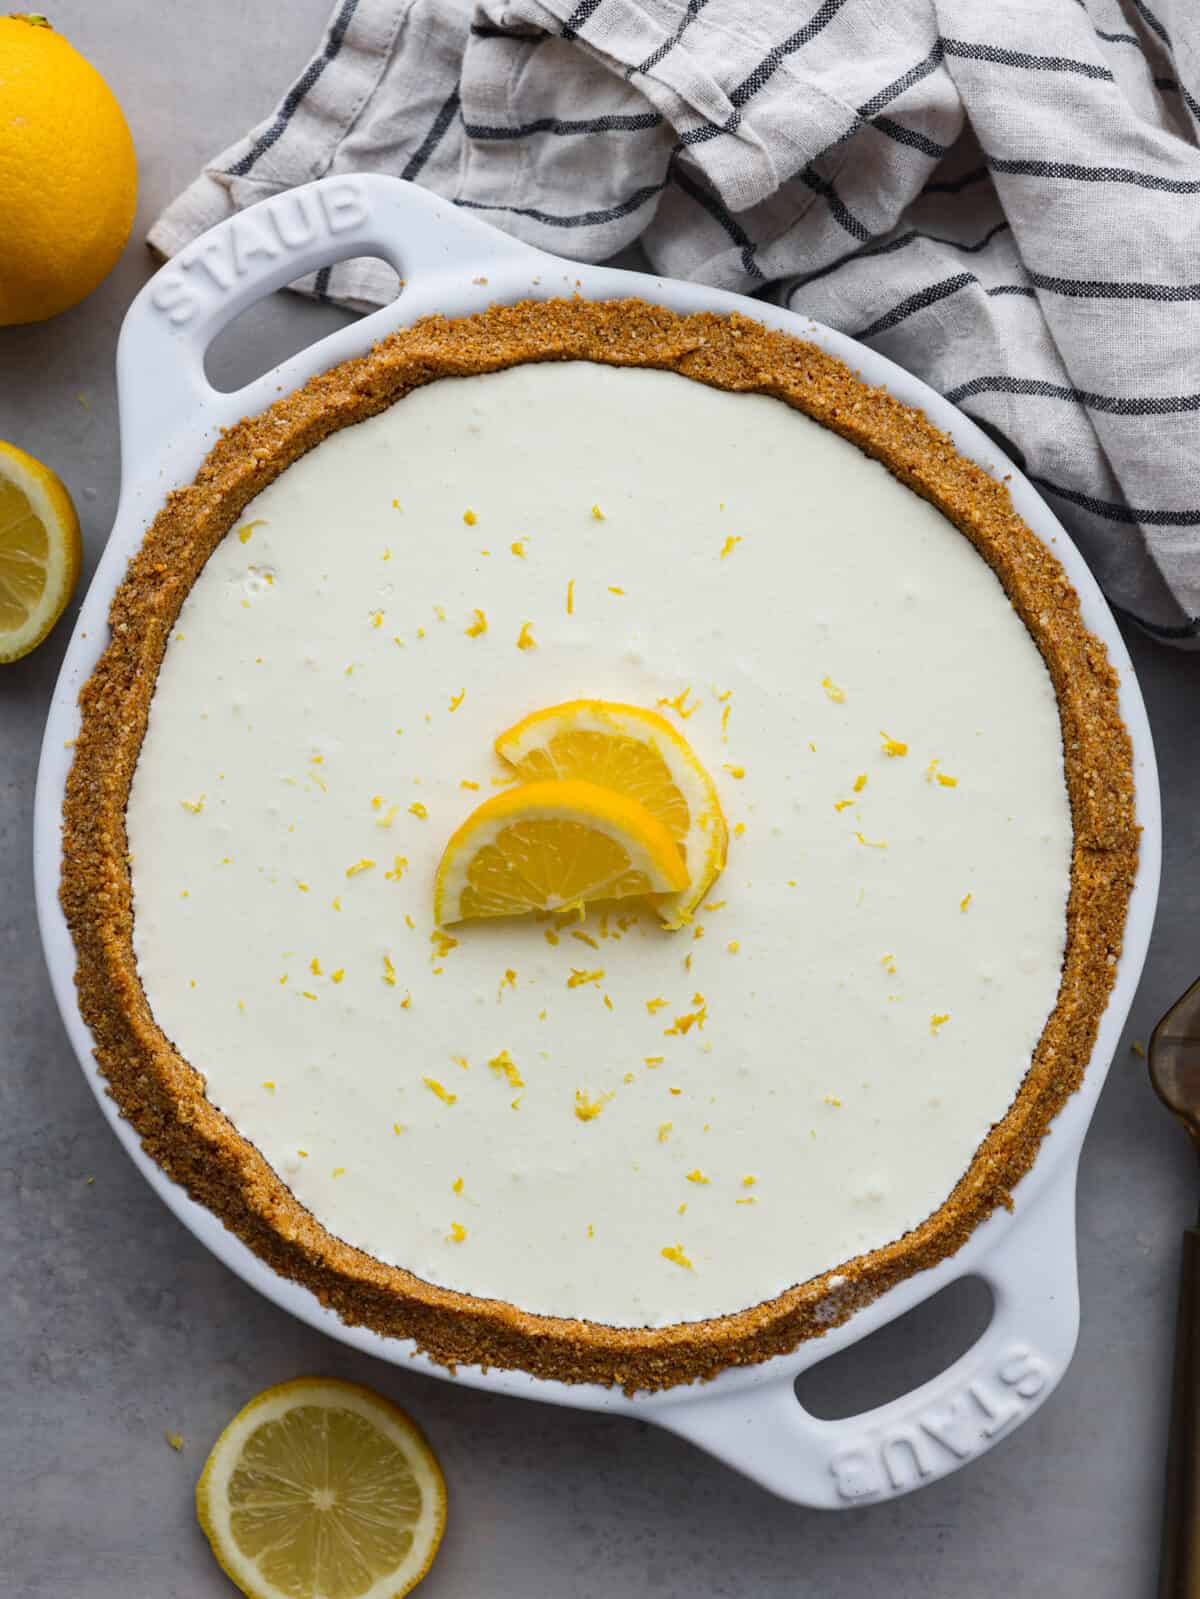 Top view of the whole no-bake lemon pie garnished with lemon slices.